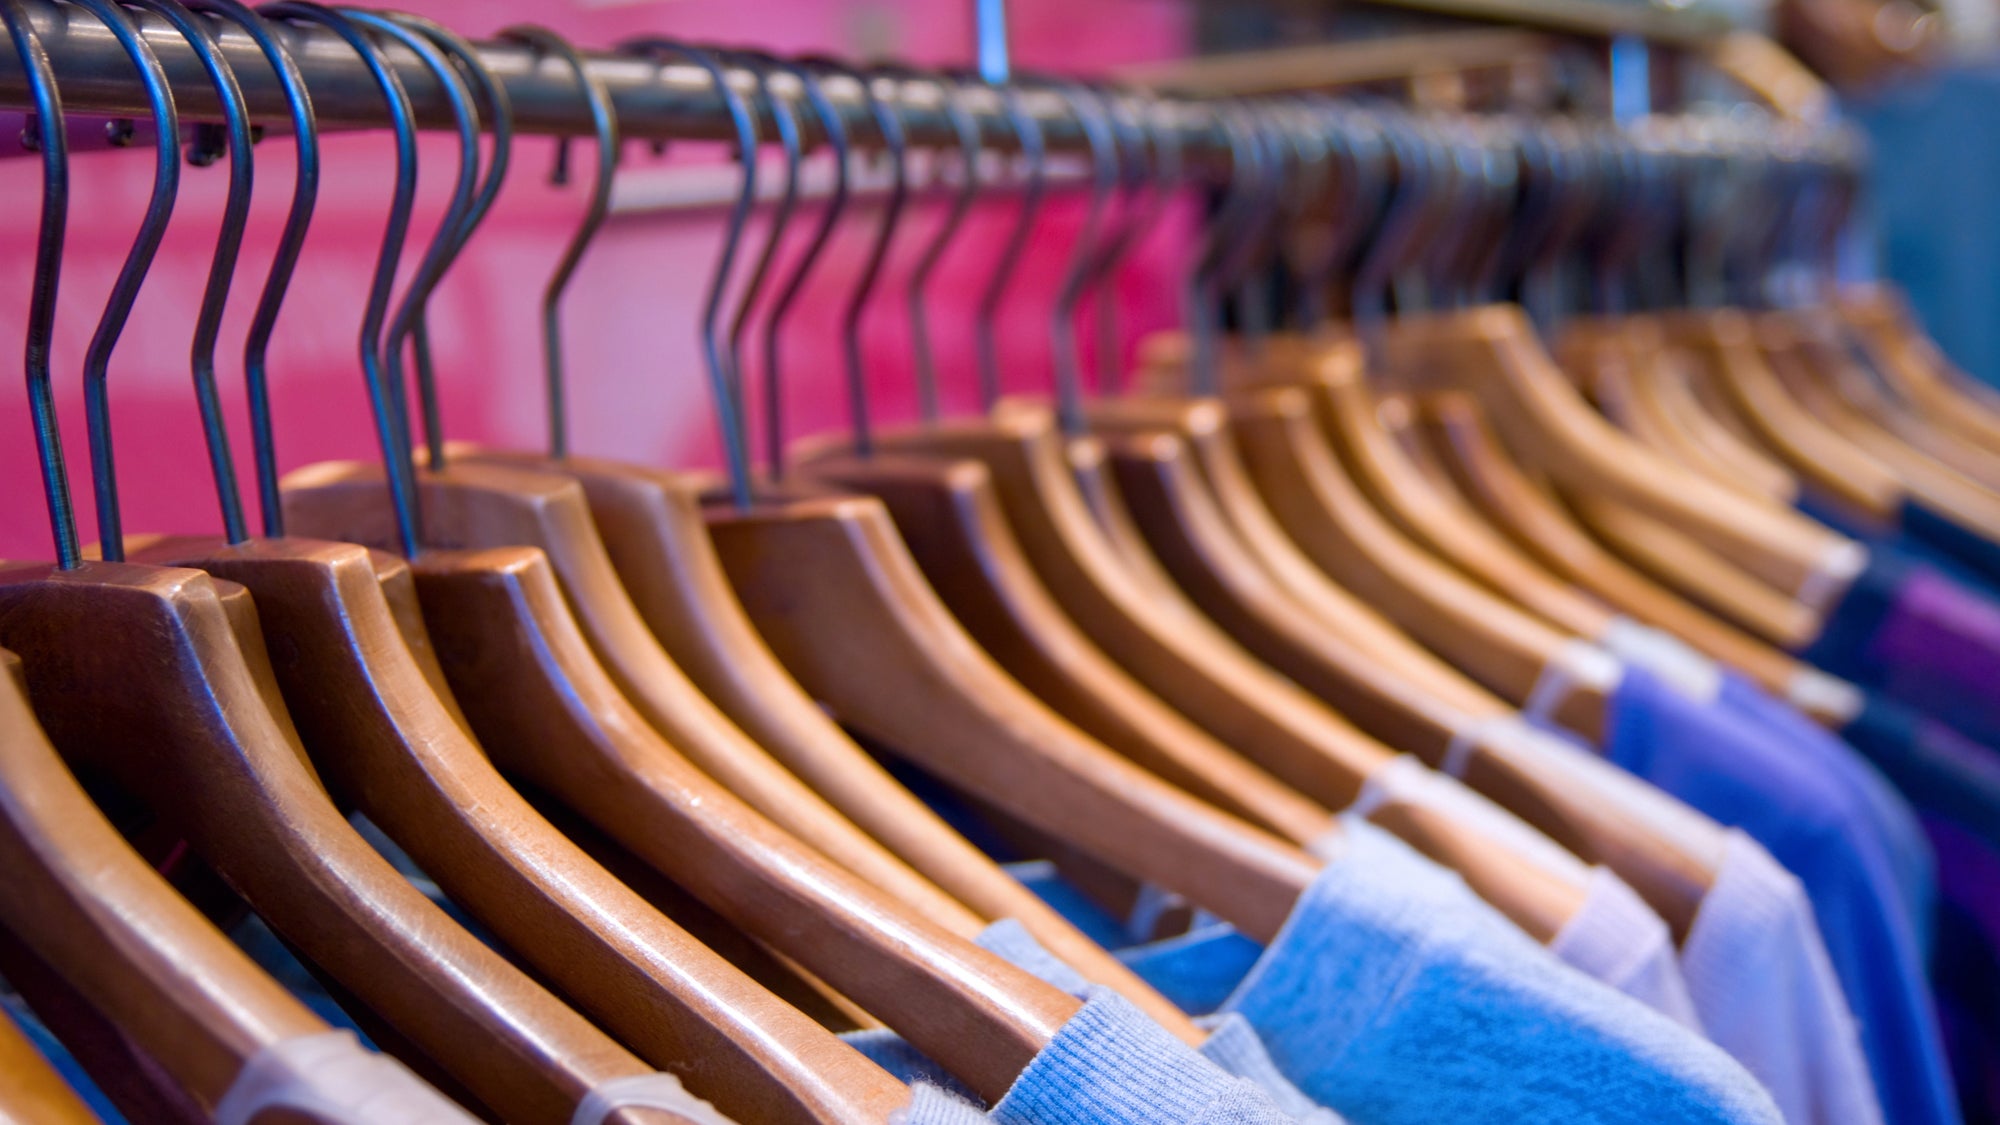 Denmark will ban clothing with 'forever chemicals'